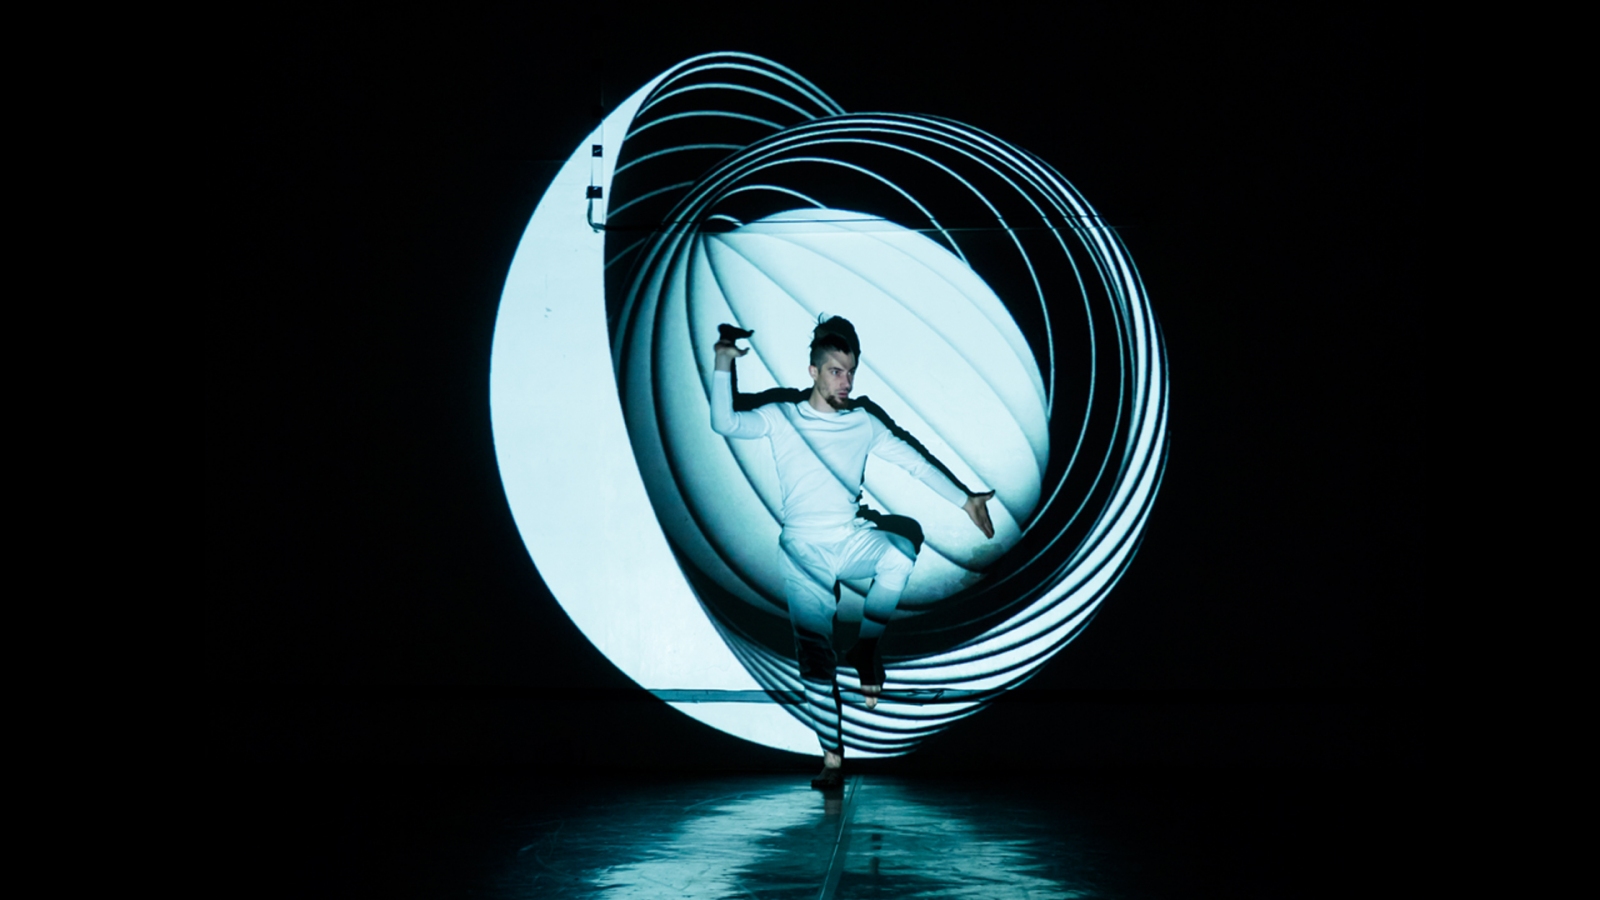 acrobat performing with interactive projection in Pantokine performance